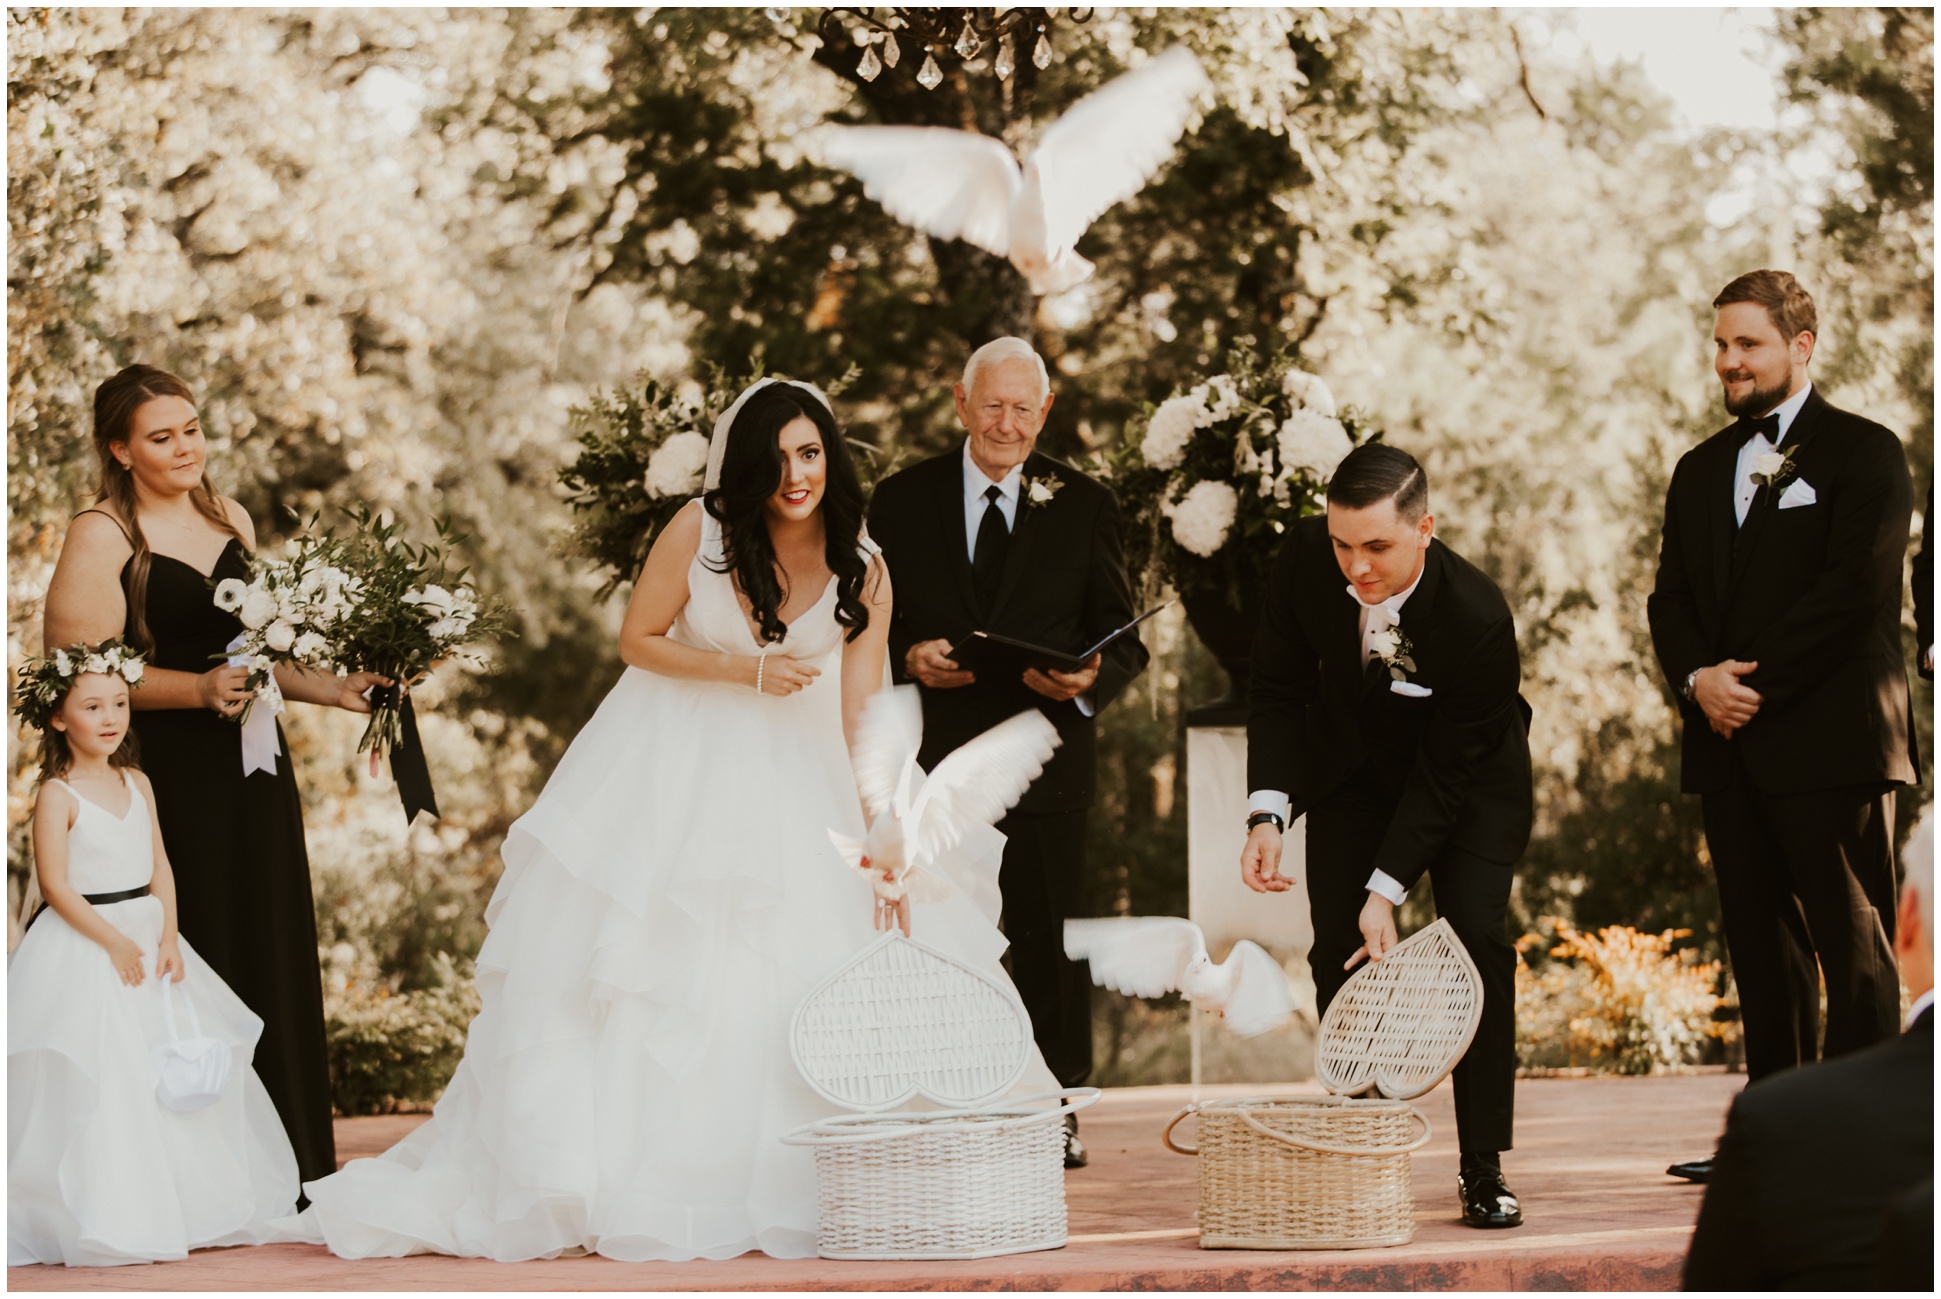 Doves released at wedding ceremony at The Springs in Rockwall